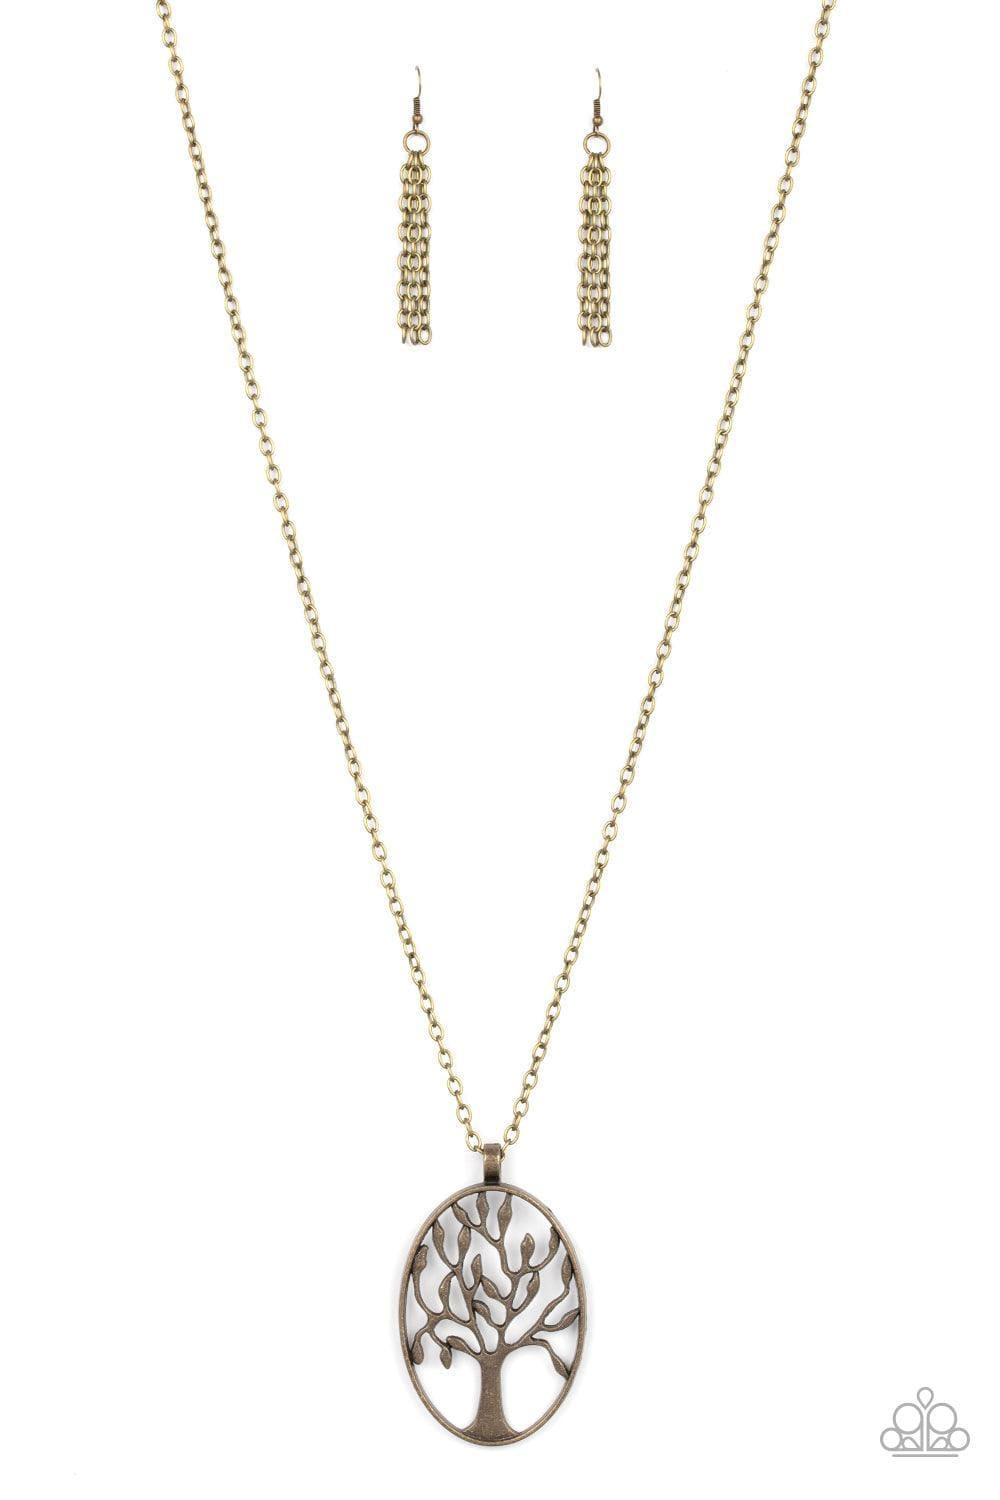 Paparazzi Accessories - Well-rooted - Brasse Necklace - Bling by JessieK